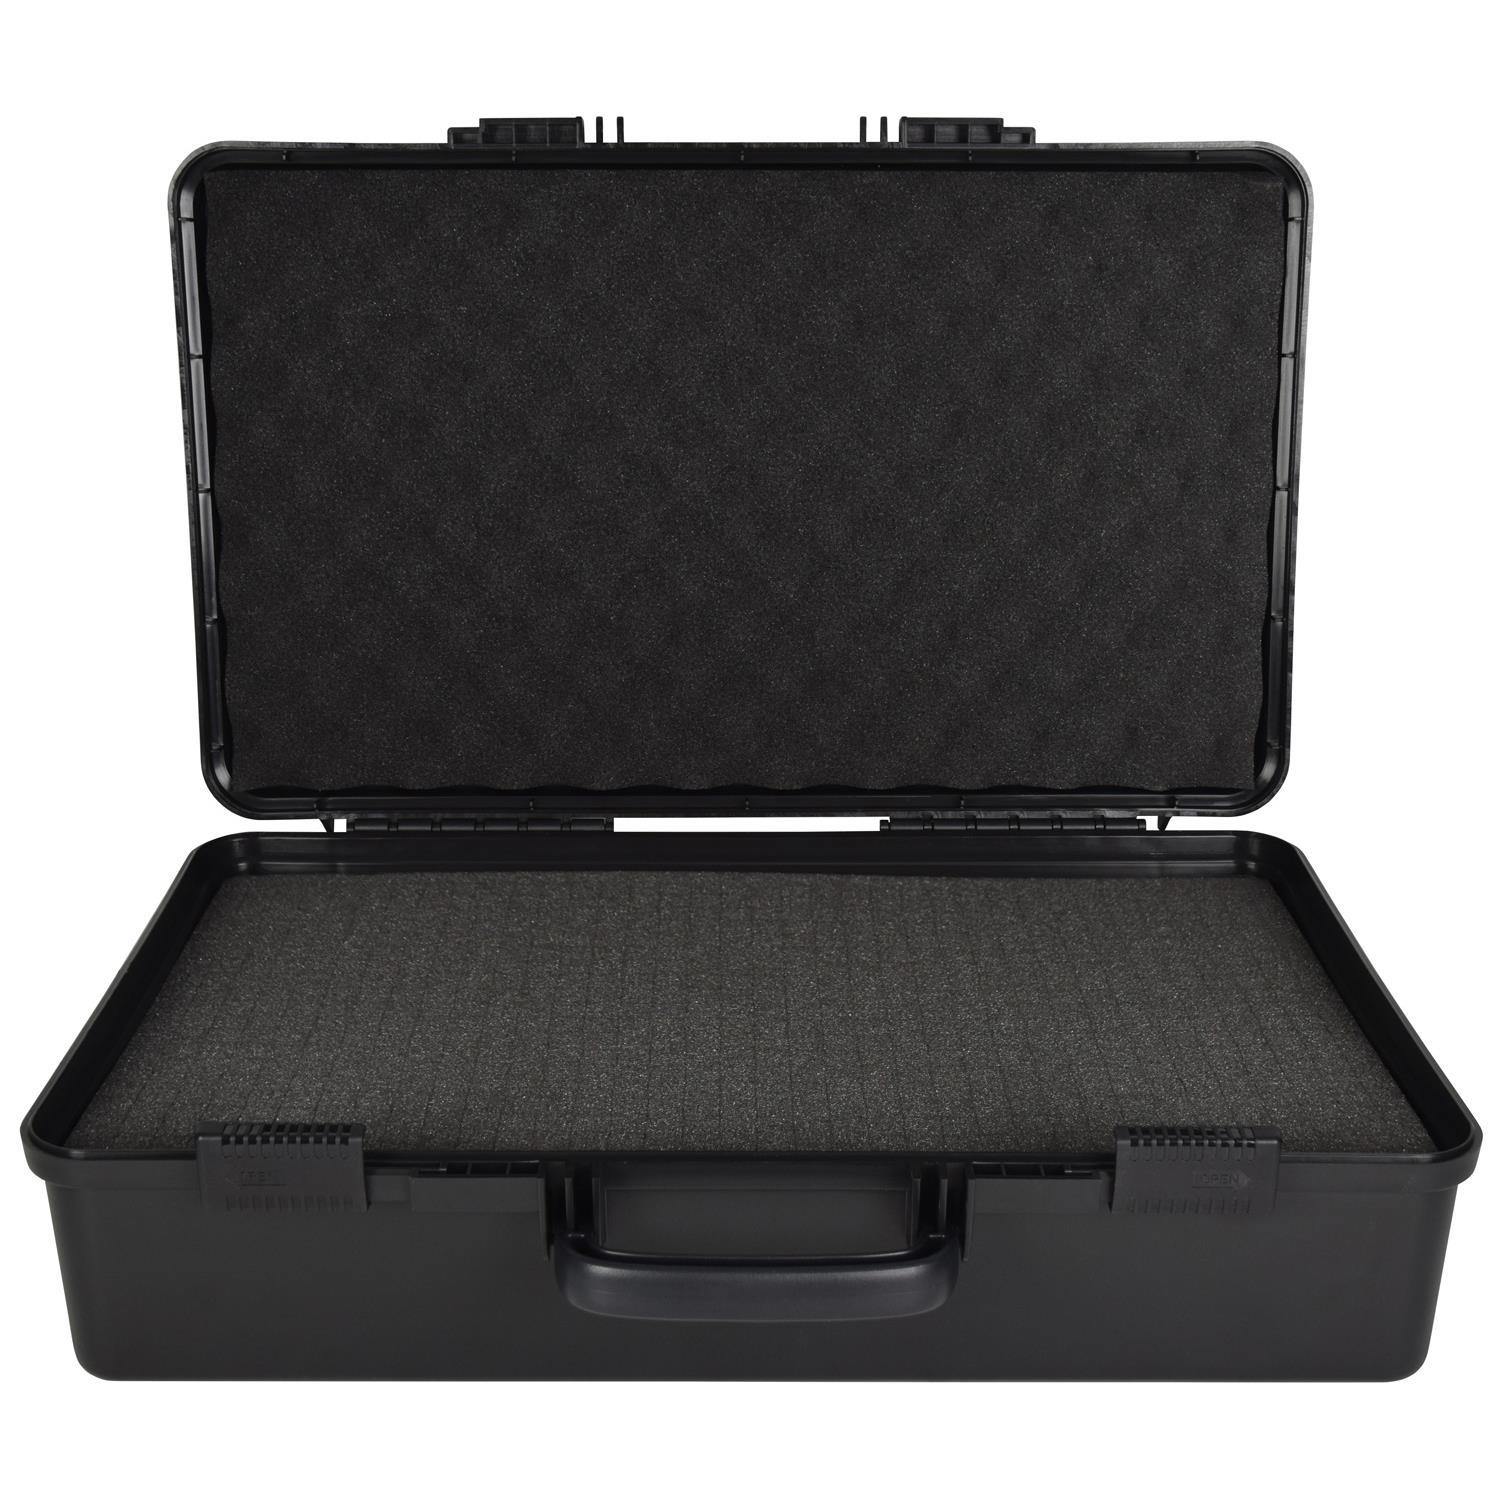 Citronic ABS445 Small ABS Flightcase for Mixer / Microphone - DY Pro Audio